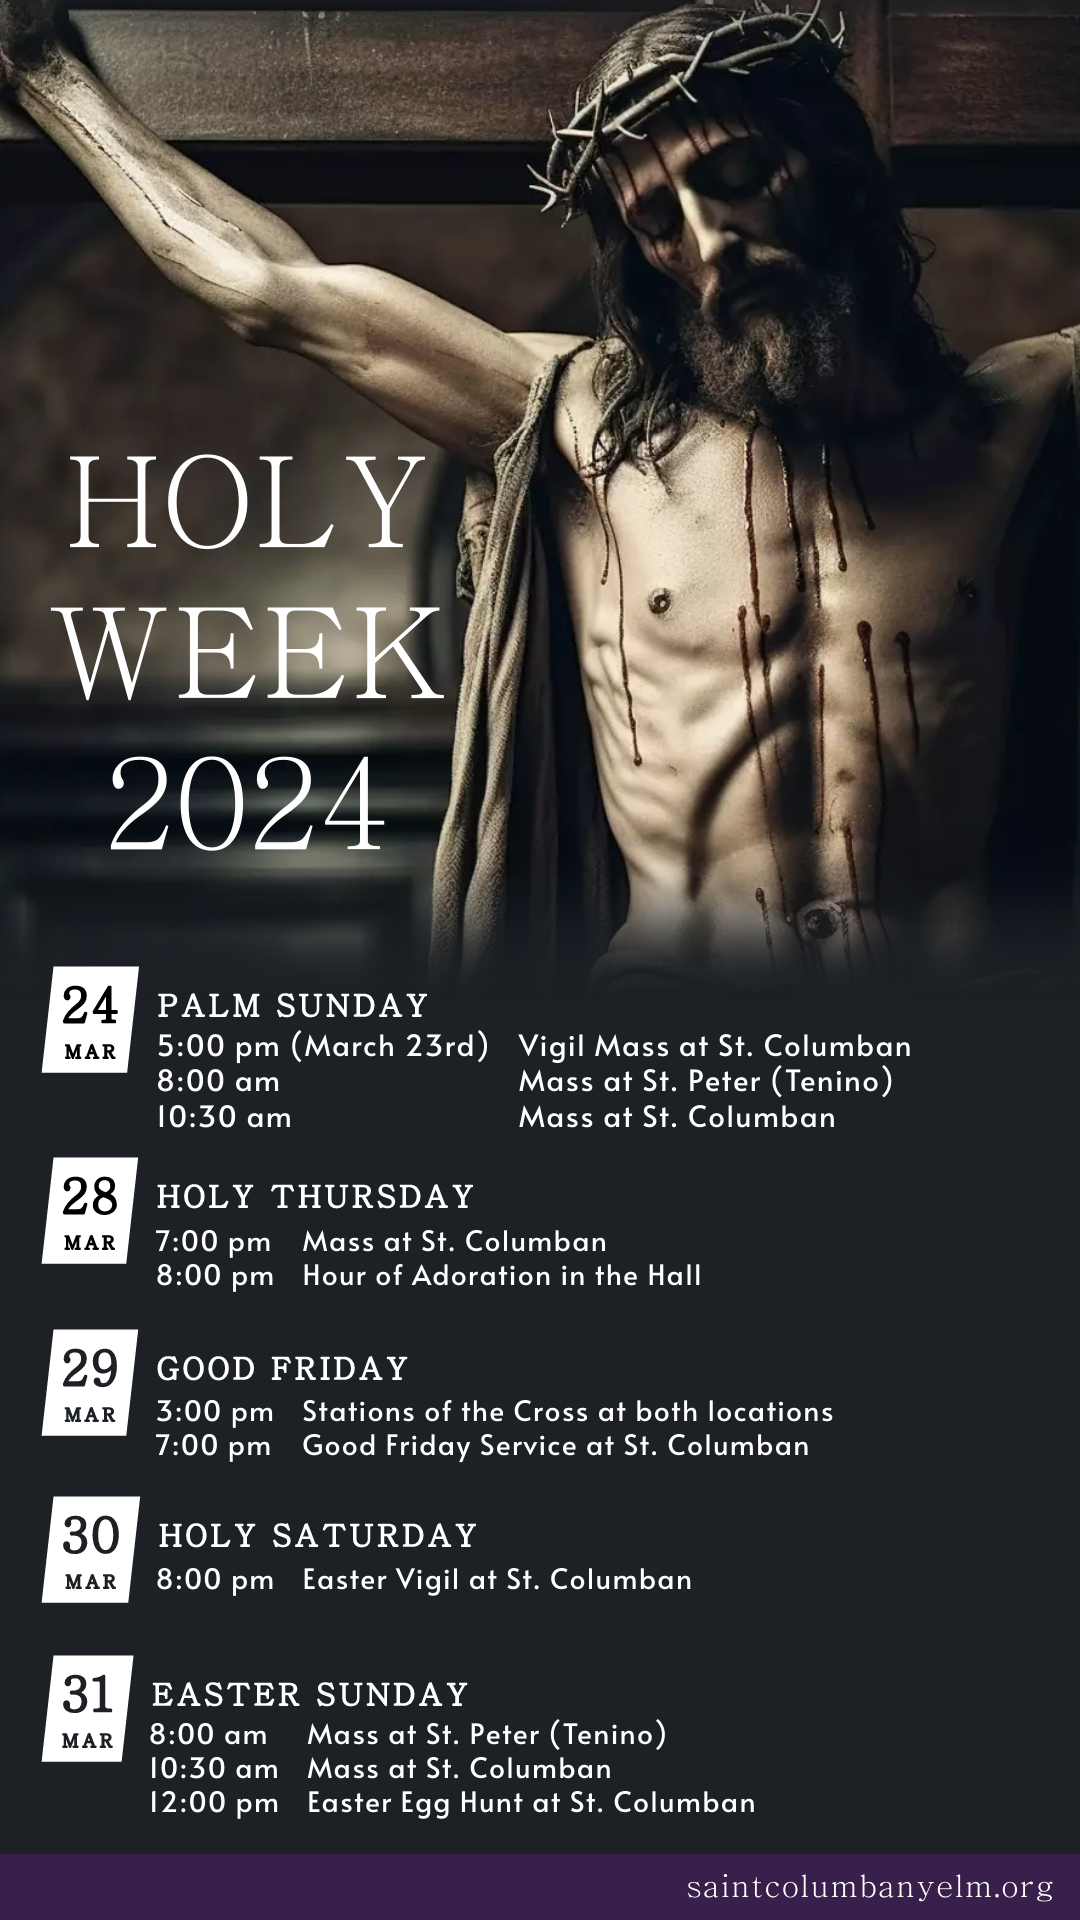 Holy Week - Made with PosterMyWall